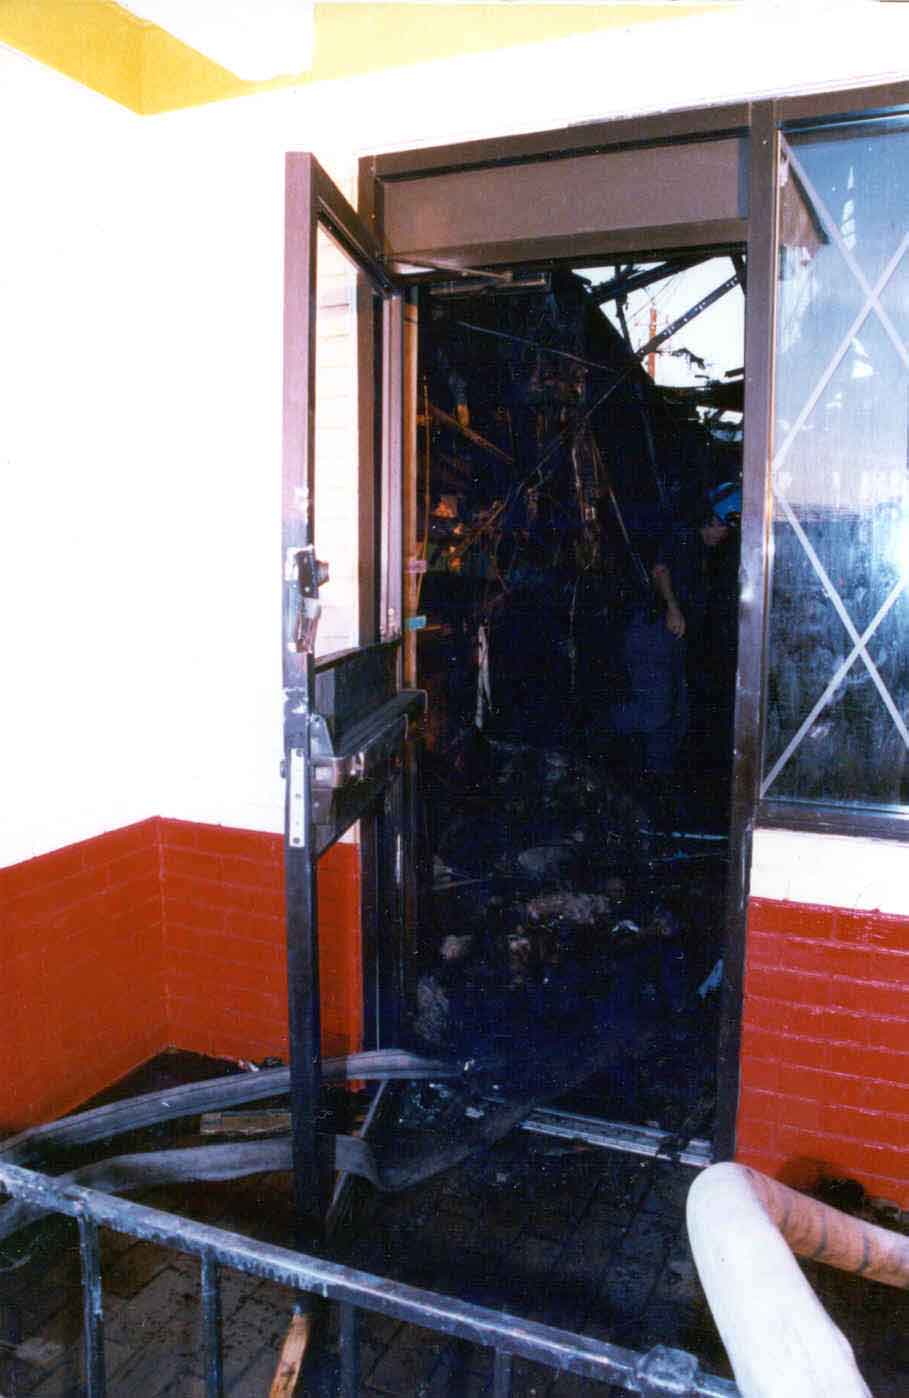 Photo 6: Post-fire, exterior view of the west side door of the restaurant.